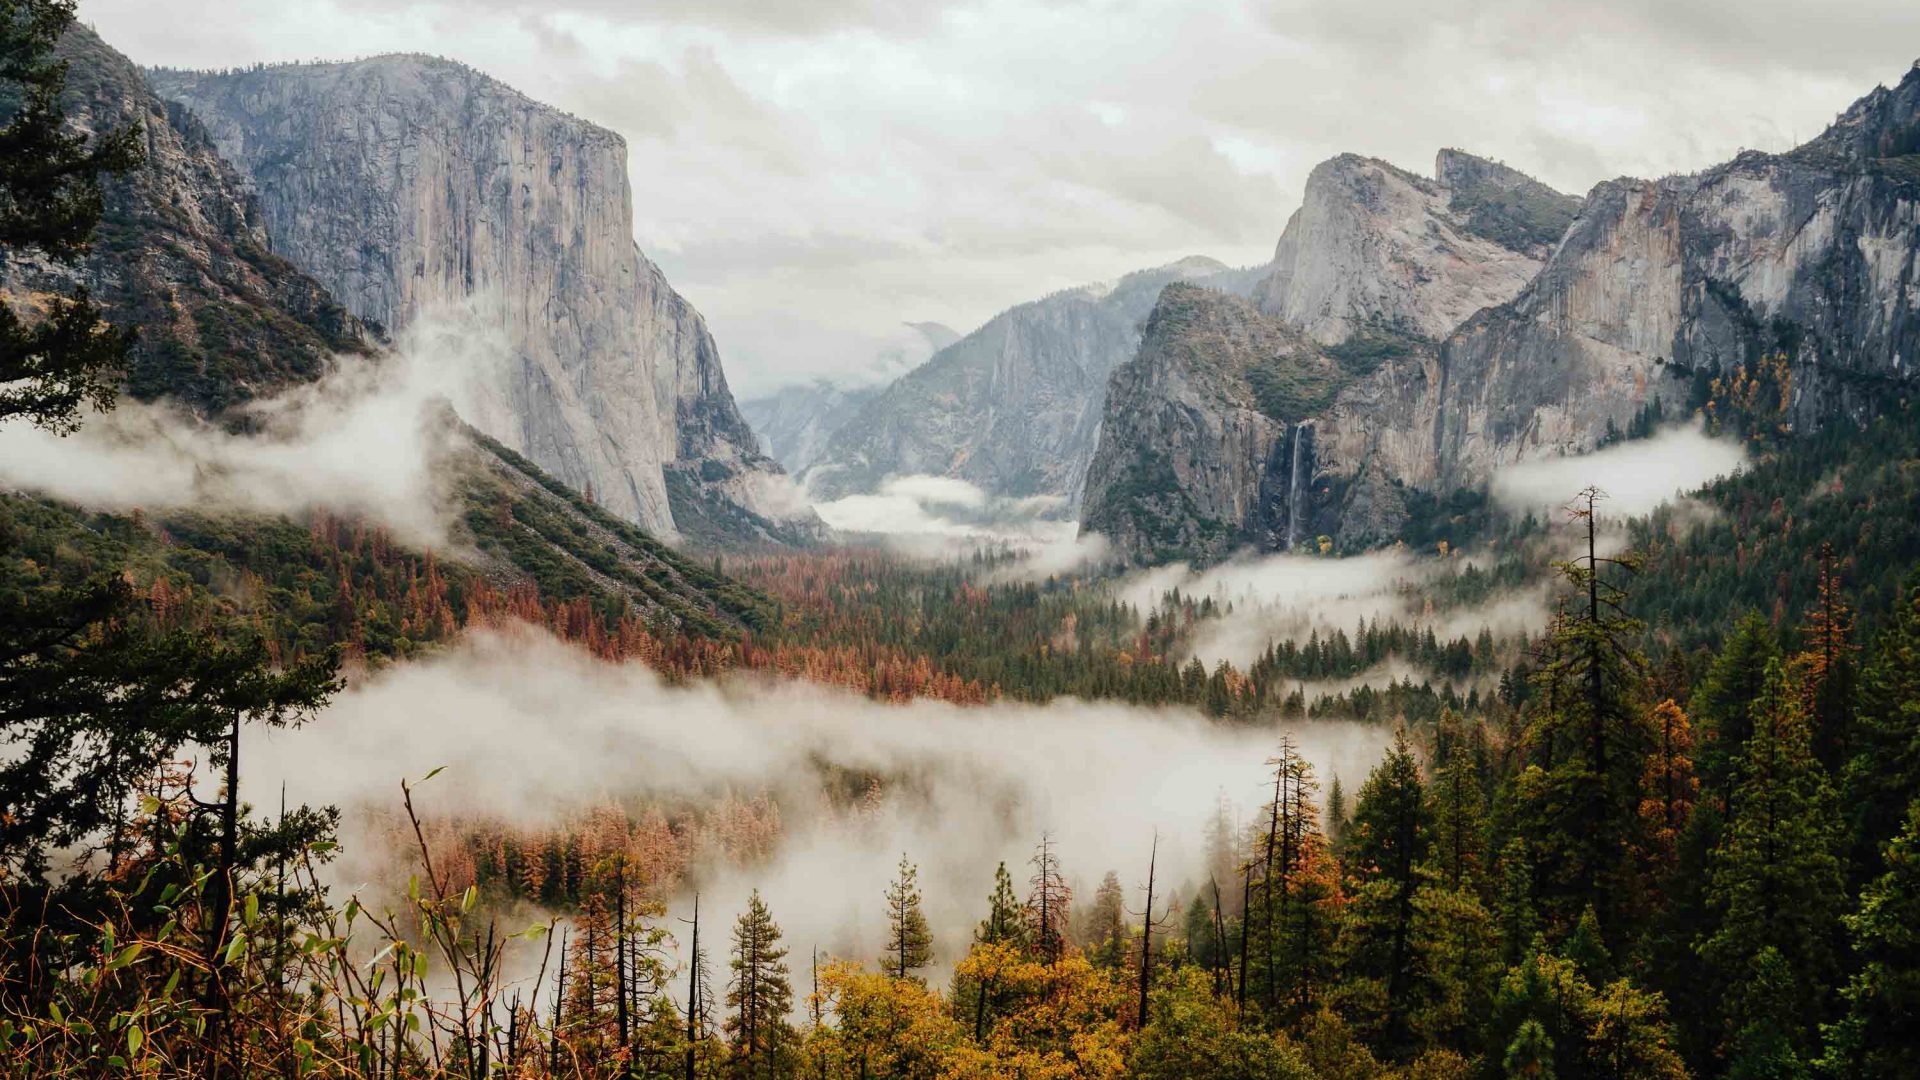 Yosemite Valley with mountains and forests shrouded in clouds.